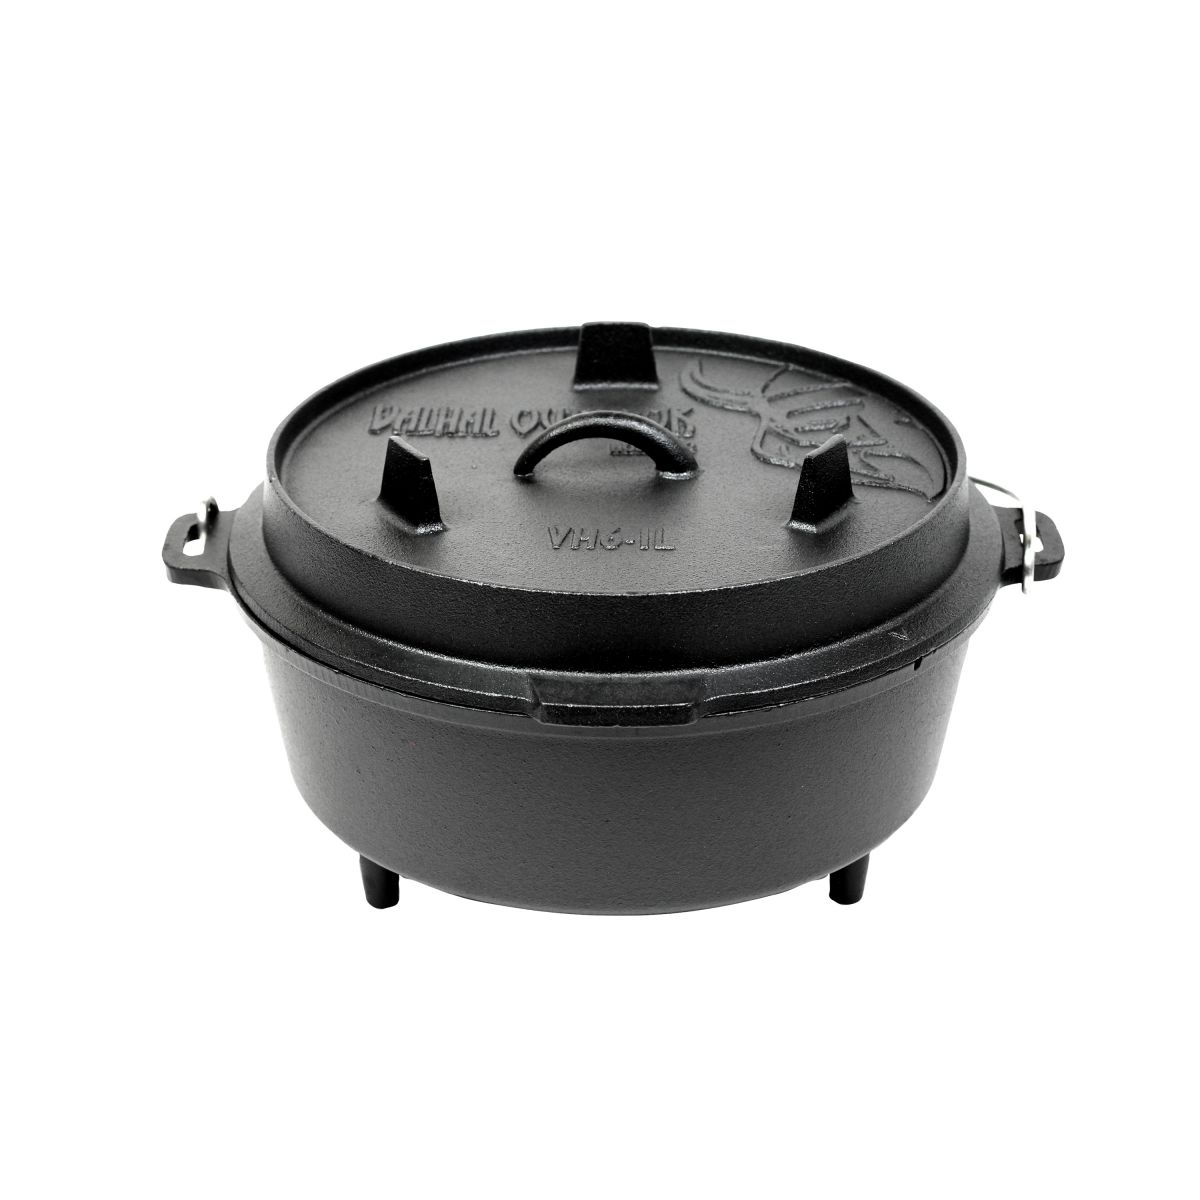 vh61l dutch oven 61l with feet